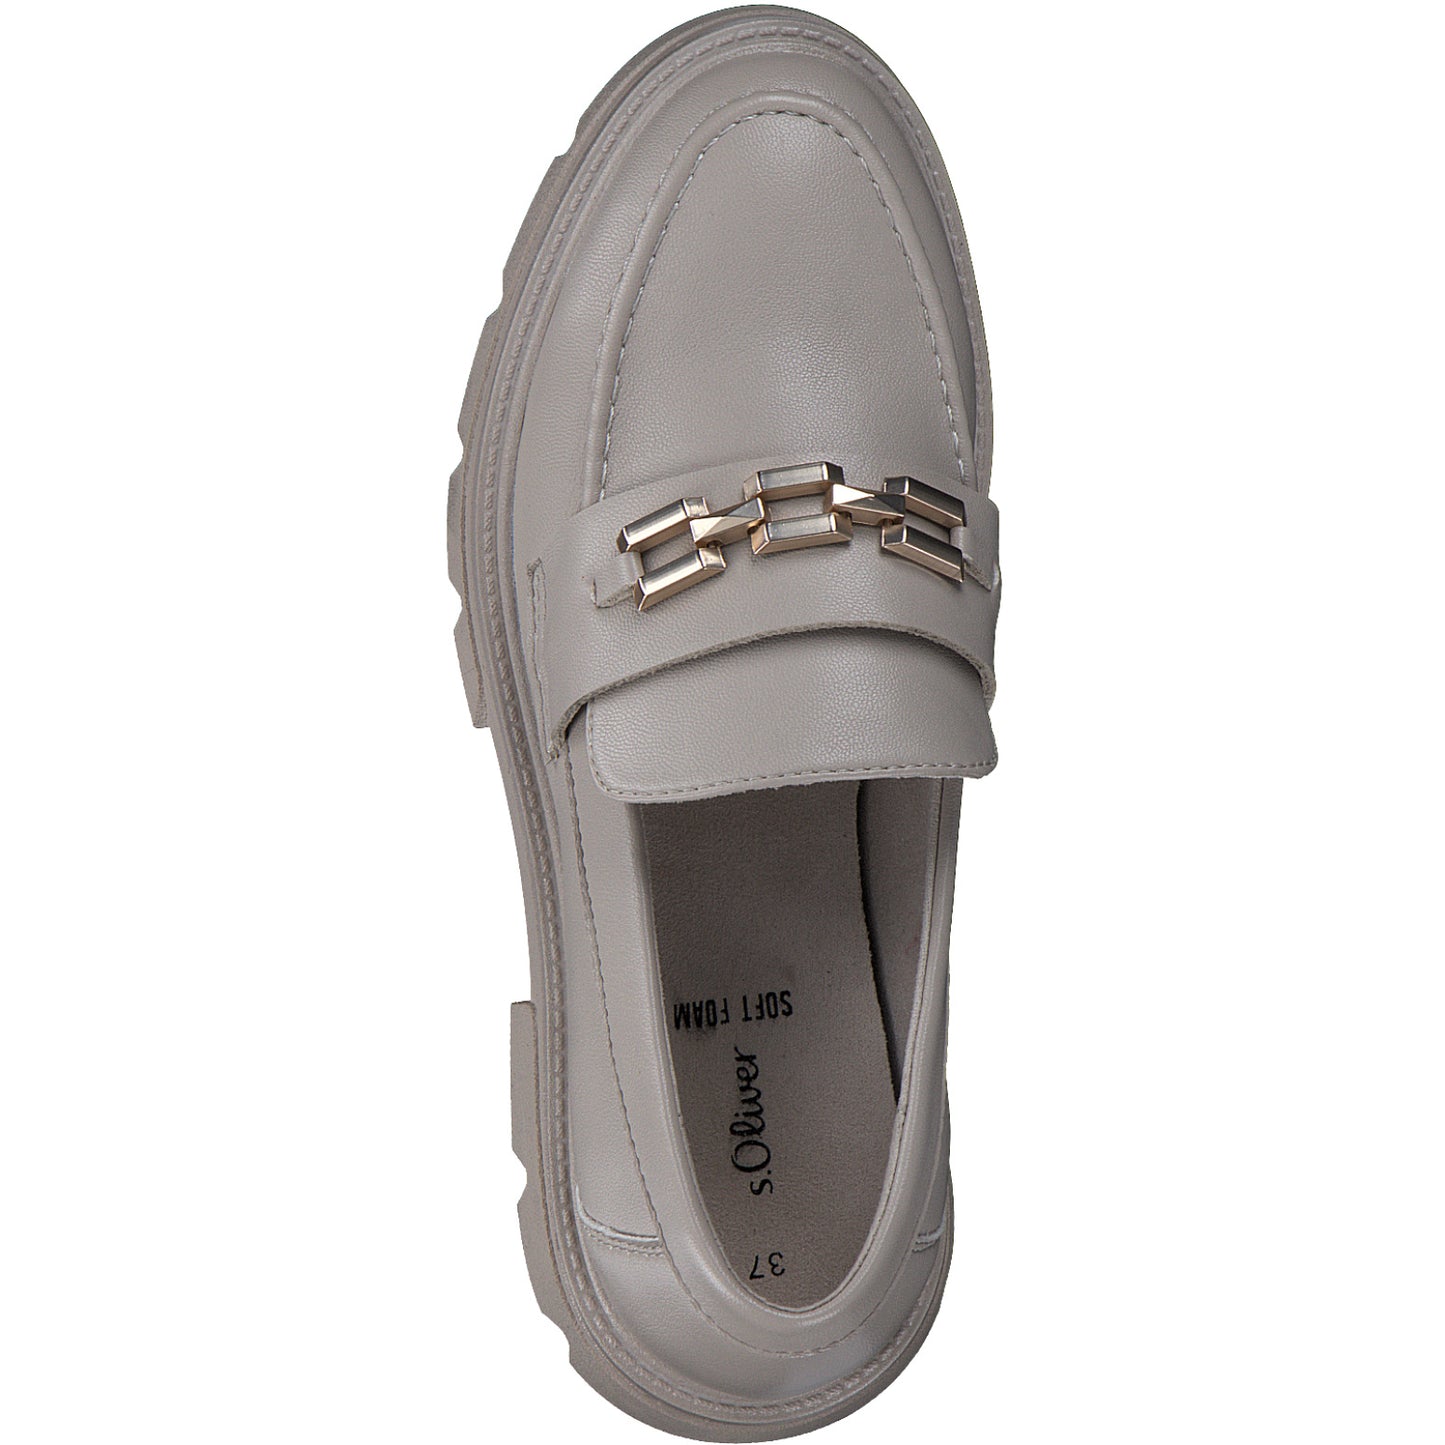 S.oliver Loafers  Ivory